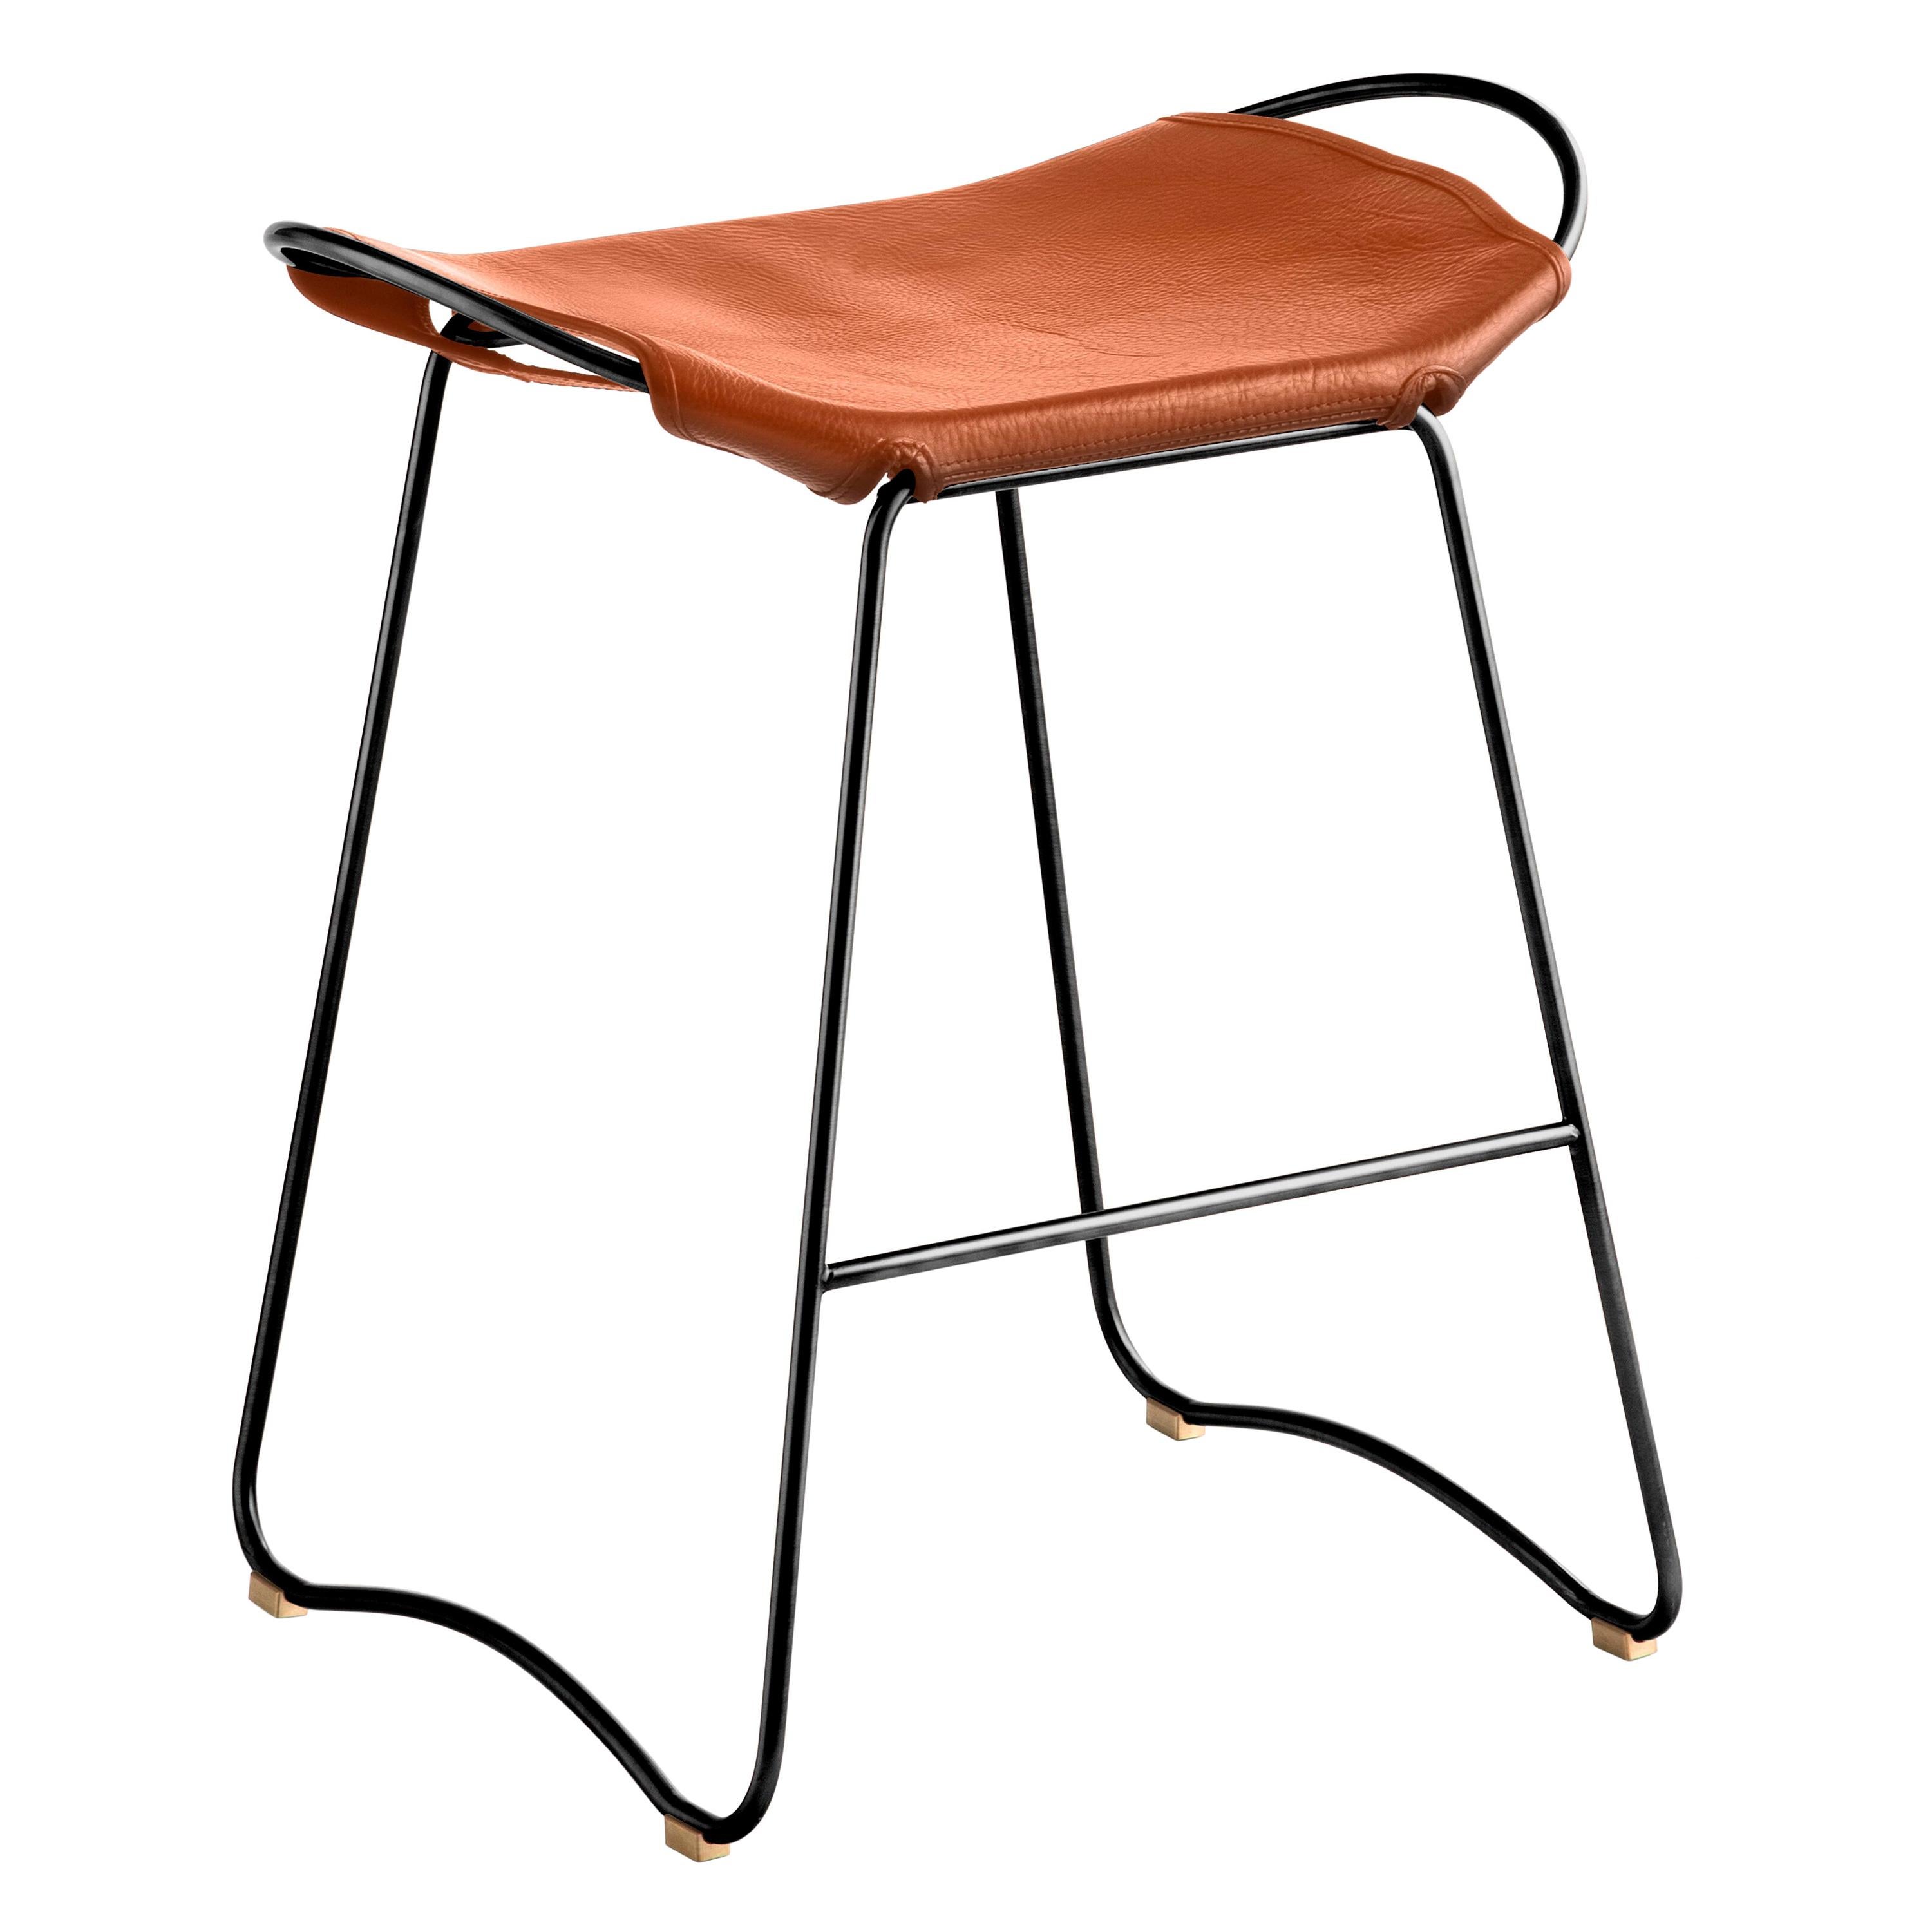 Bar Stool, Black Smoke Steel and Natural Tobacco Leather, Contemporary Style